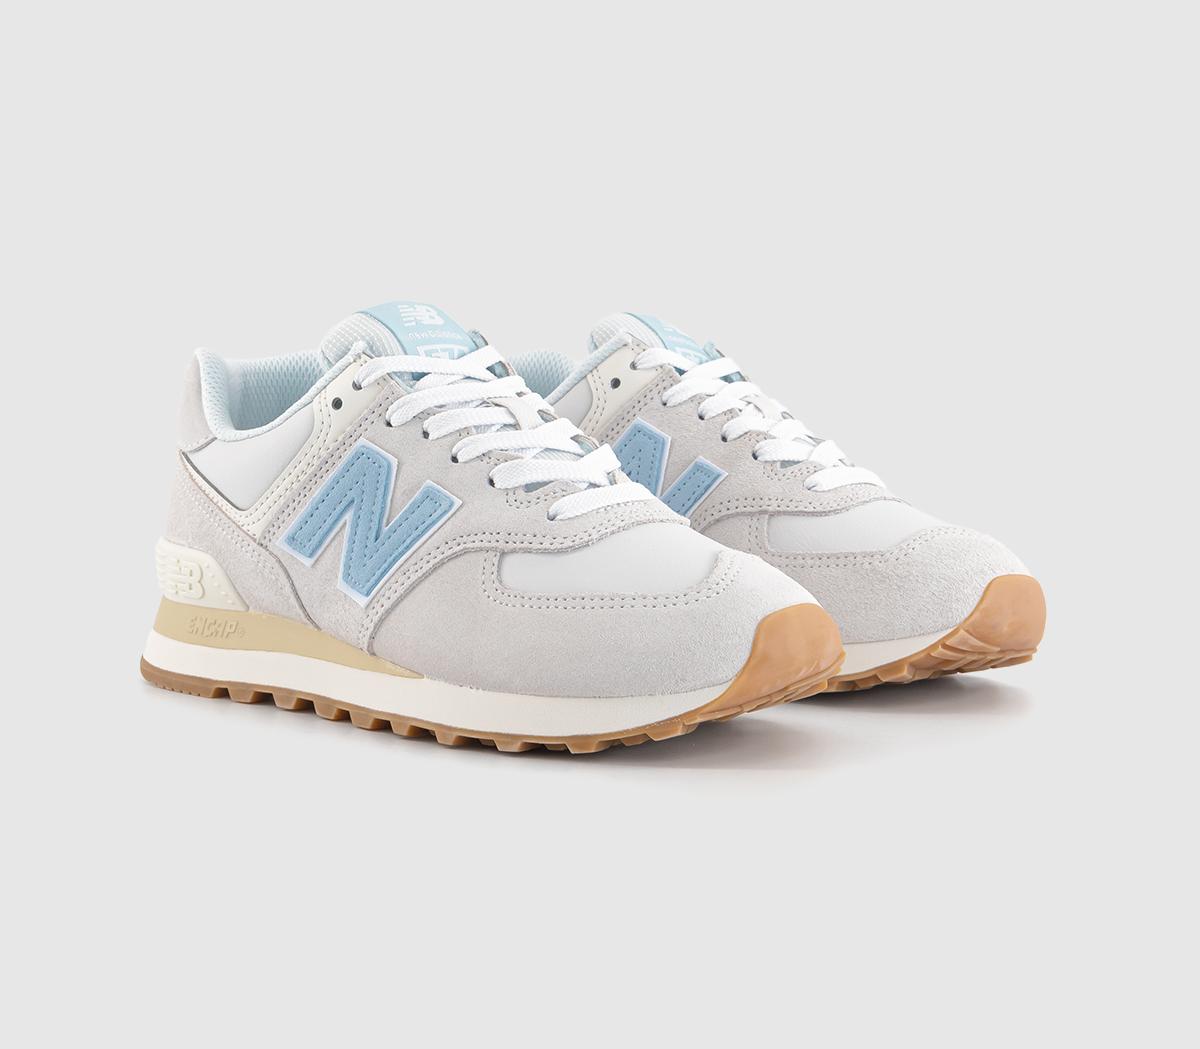 New Balance Womens 574 Trainers Reflection Natural, 4.5